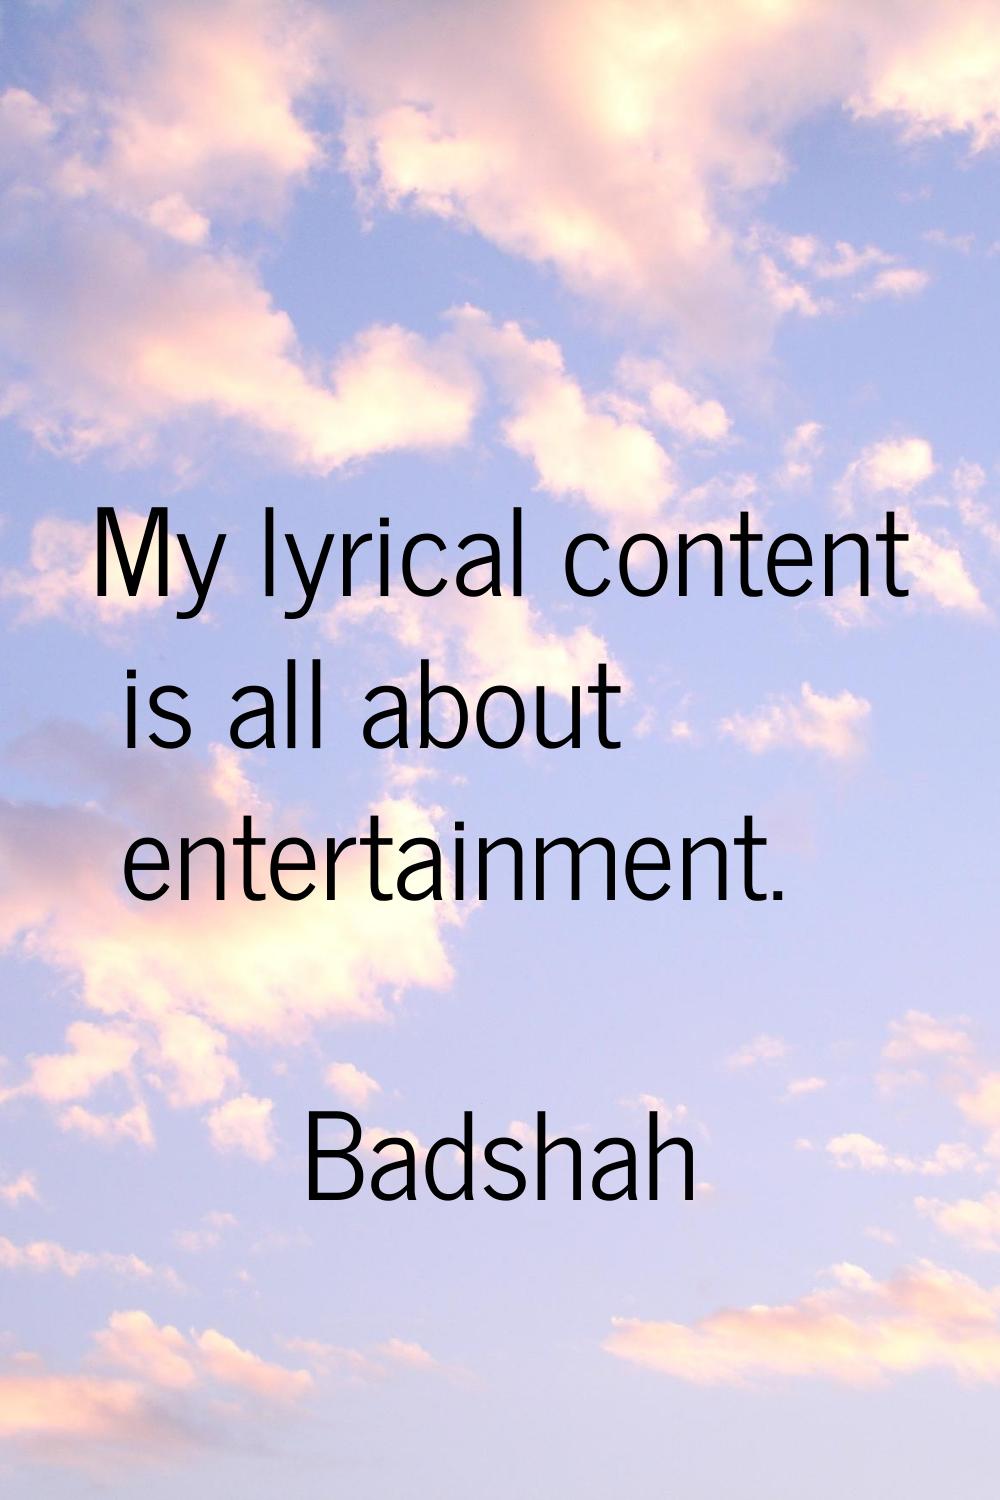 My lyrical content is all about entertainment.